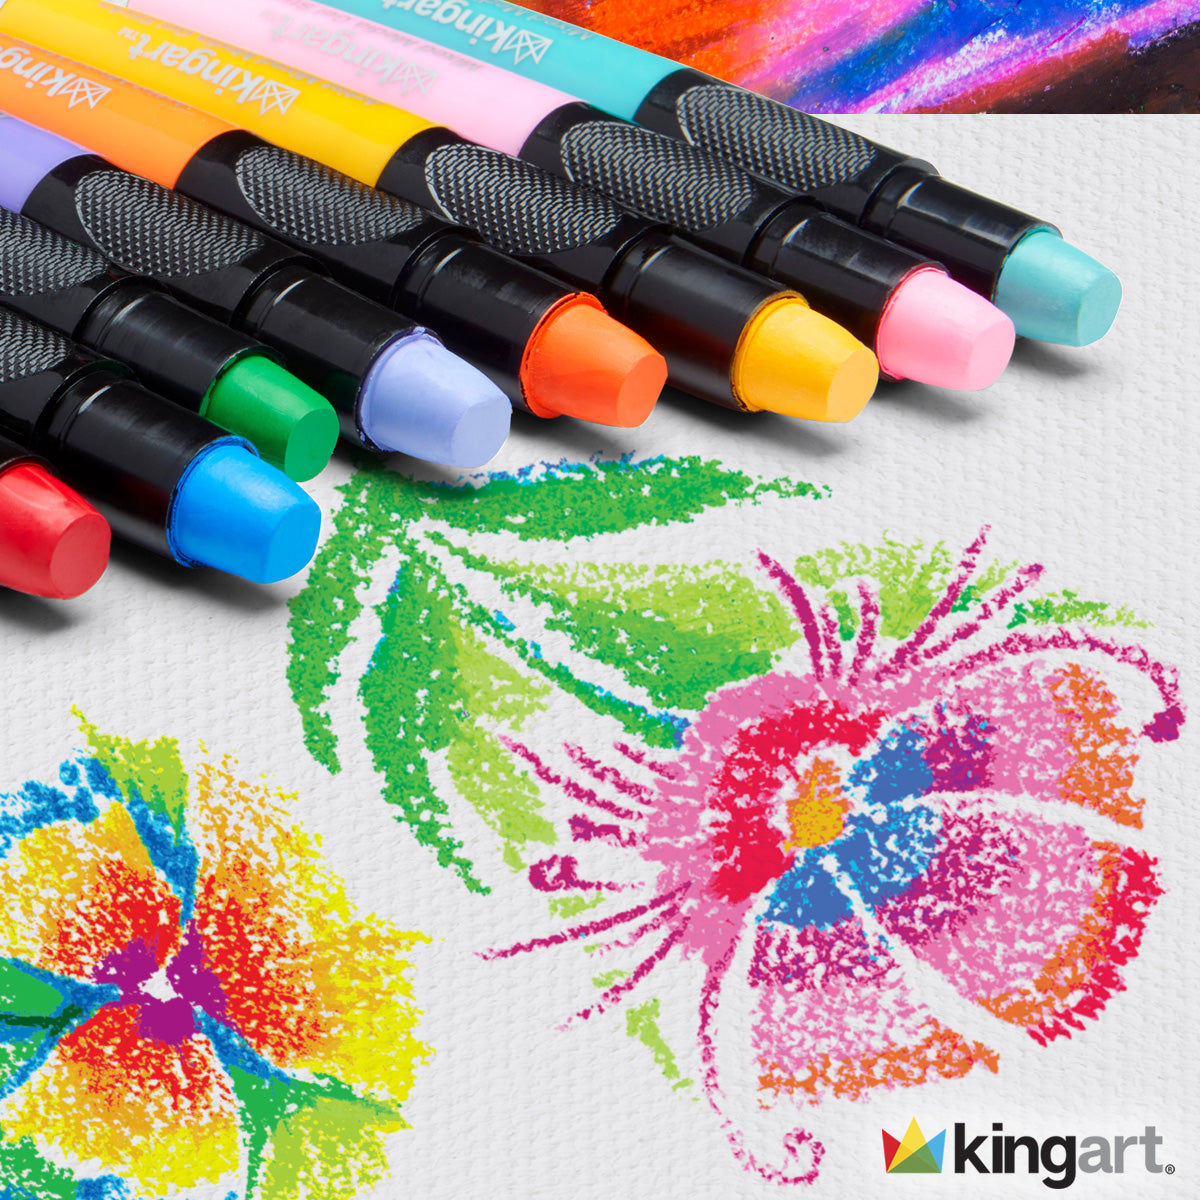 KINGART 580-48 GEL STICK Set, Artist Pigment Crayons, 48 Unique Colors,  Water Soluble, Creamy, and Odorless, Use on Paper, Wood, Canvas and more